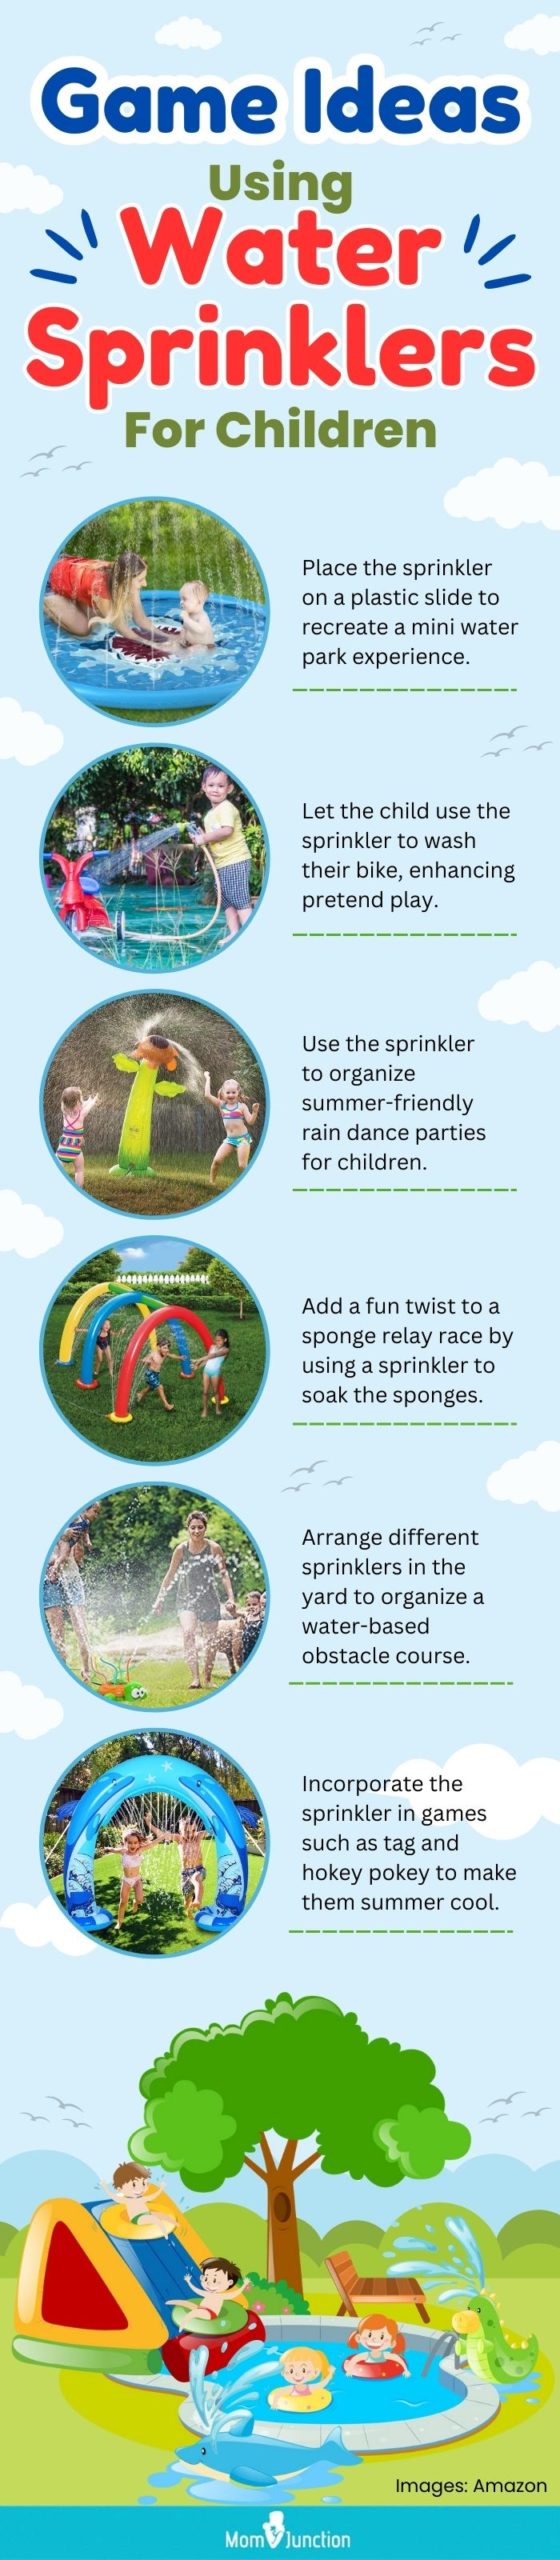 Game Ideas Using Water Sprinklers For Children (infographic)